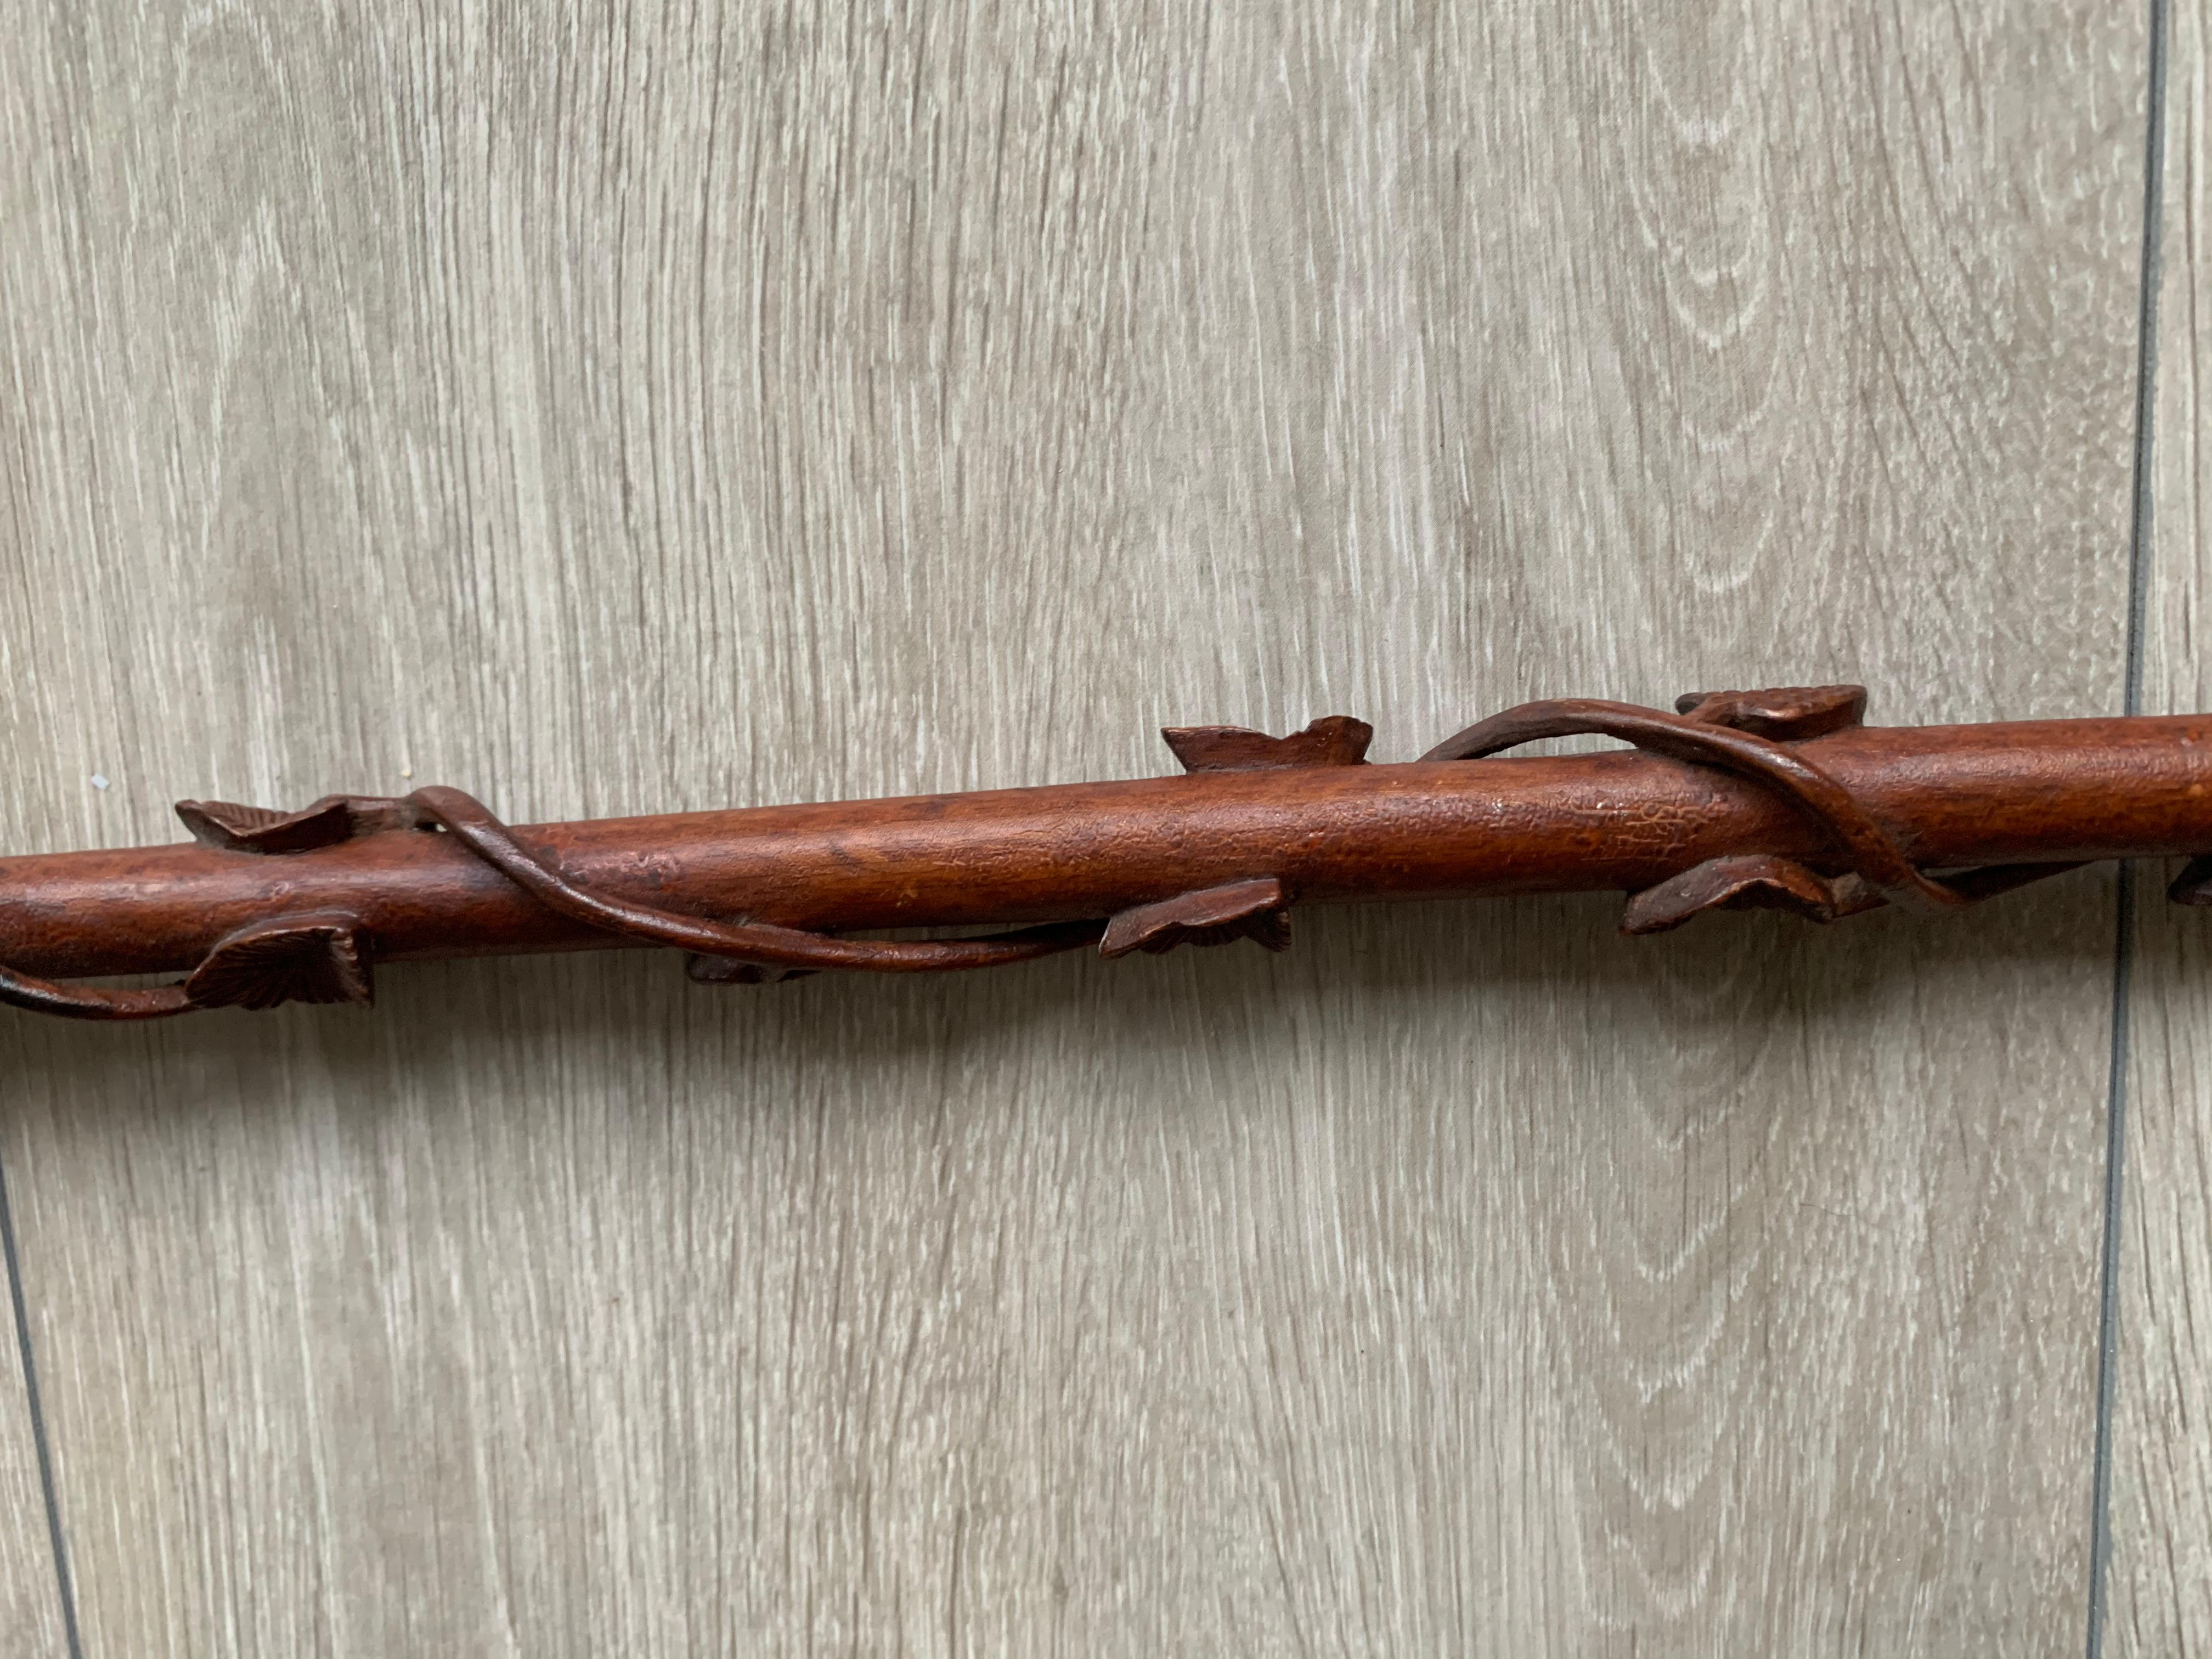 European Hunting Cane Walking Stick with Carved Terrier Head and Leaves All Around